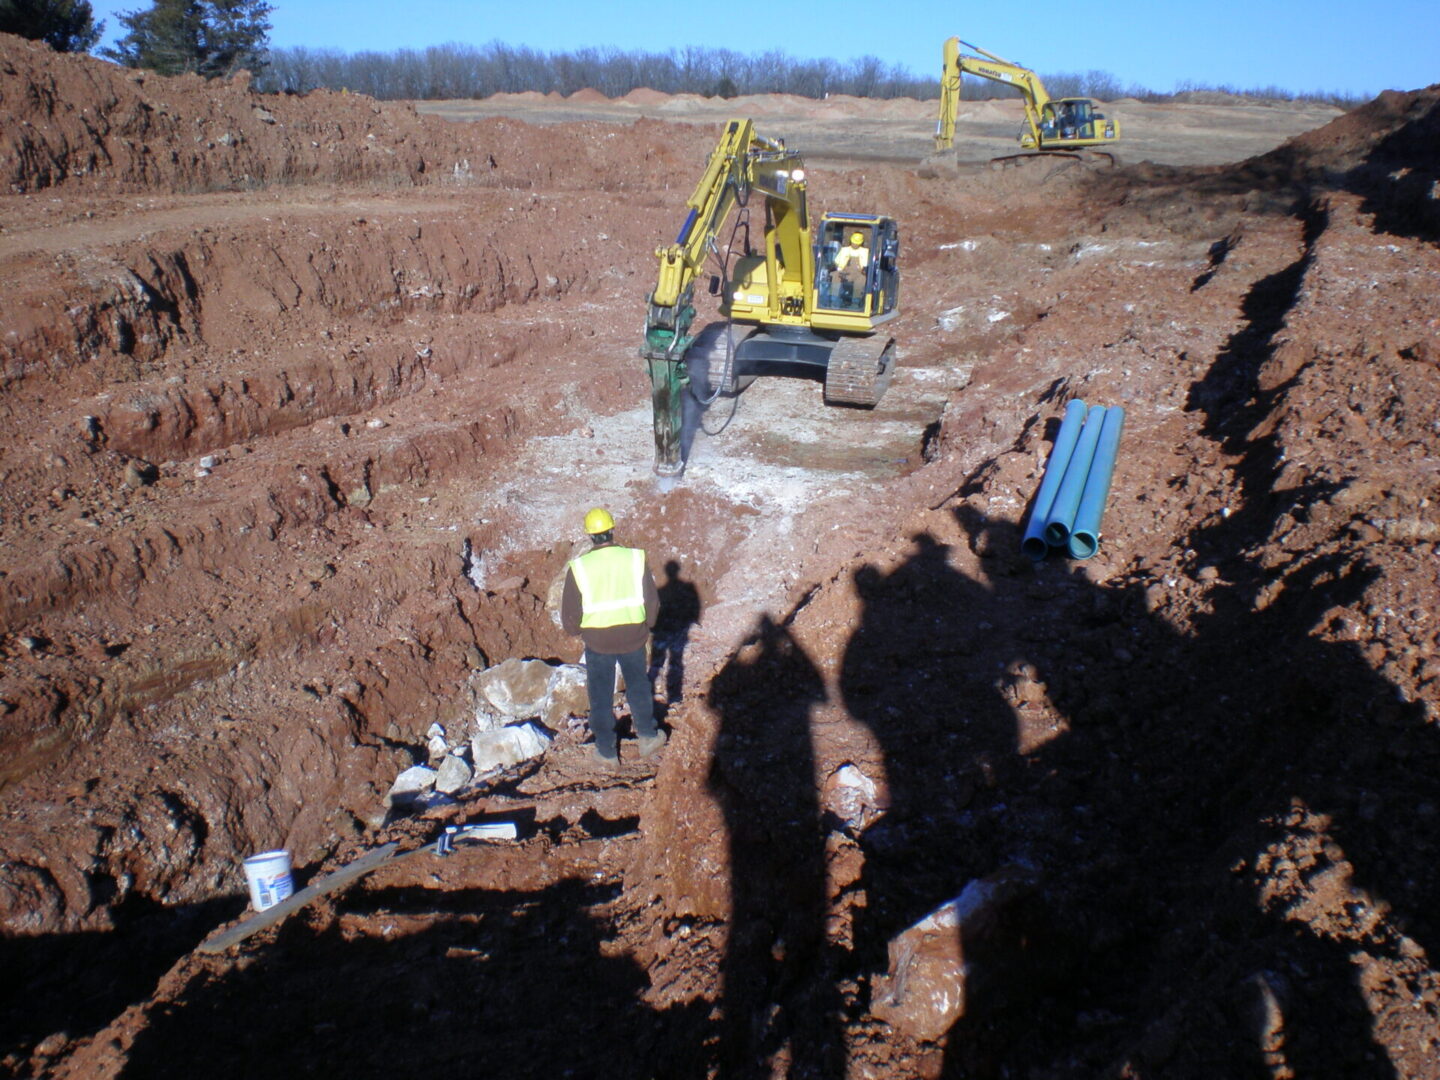 Construction workers and excavators at a large excavation site with pipes ready for installation.